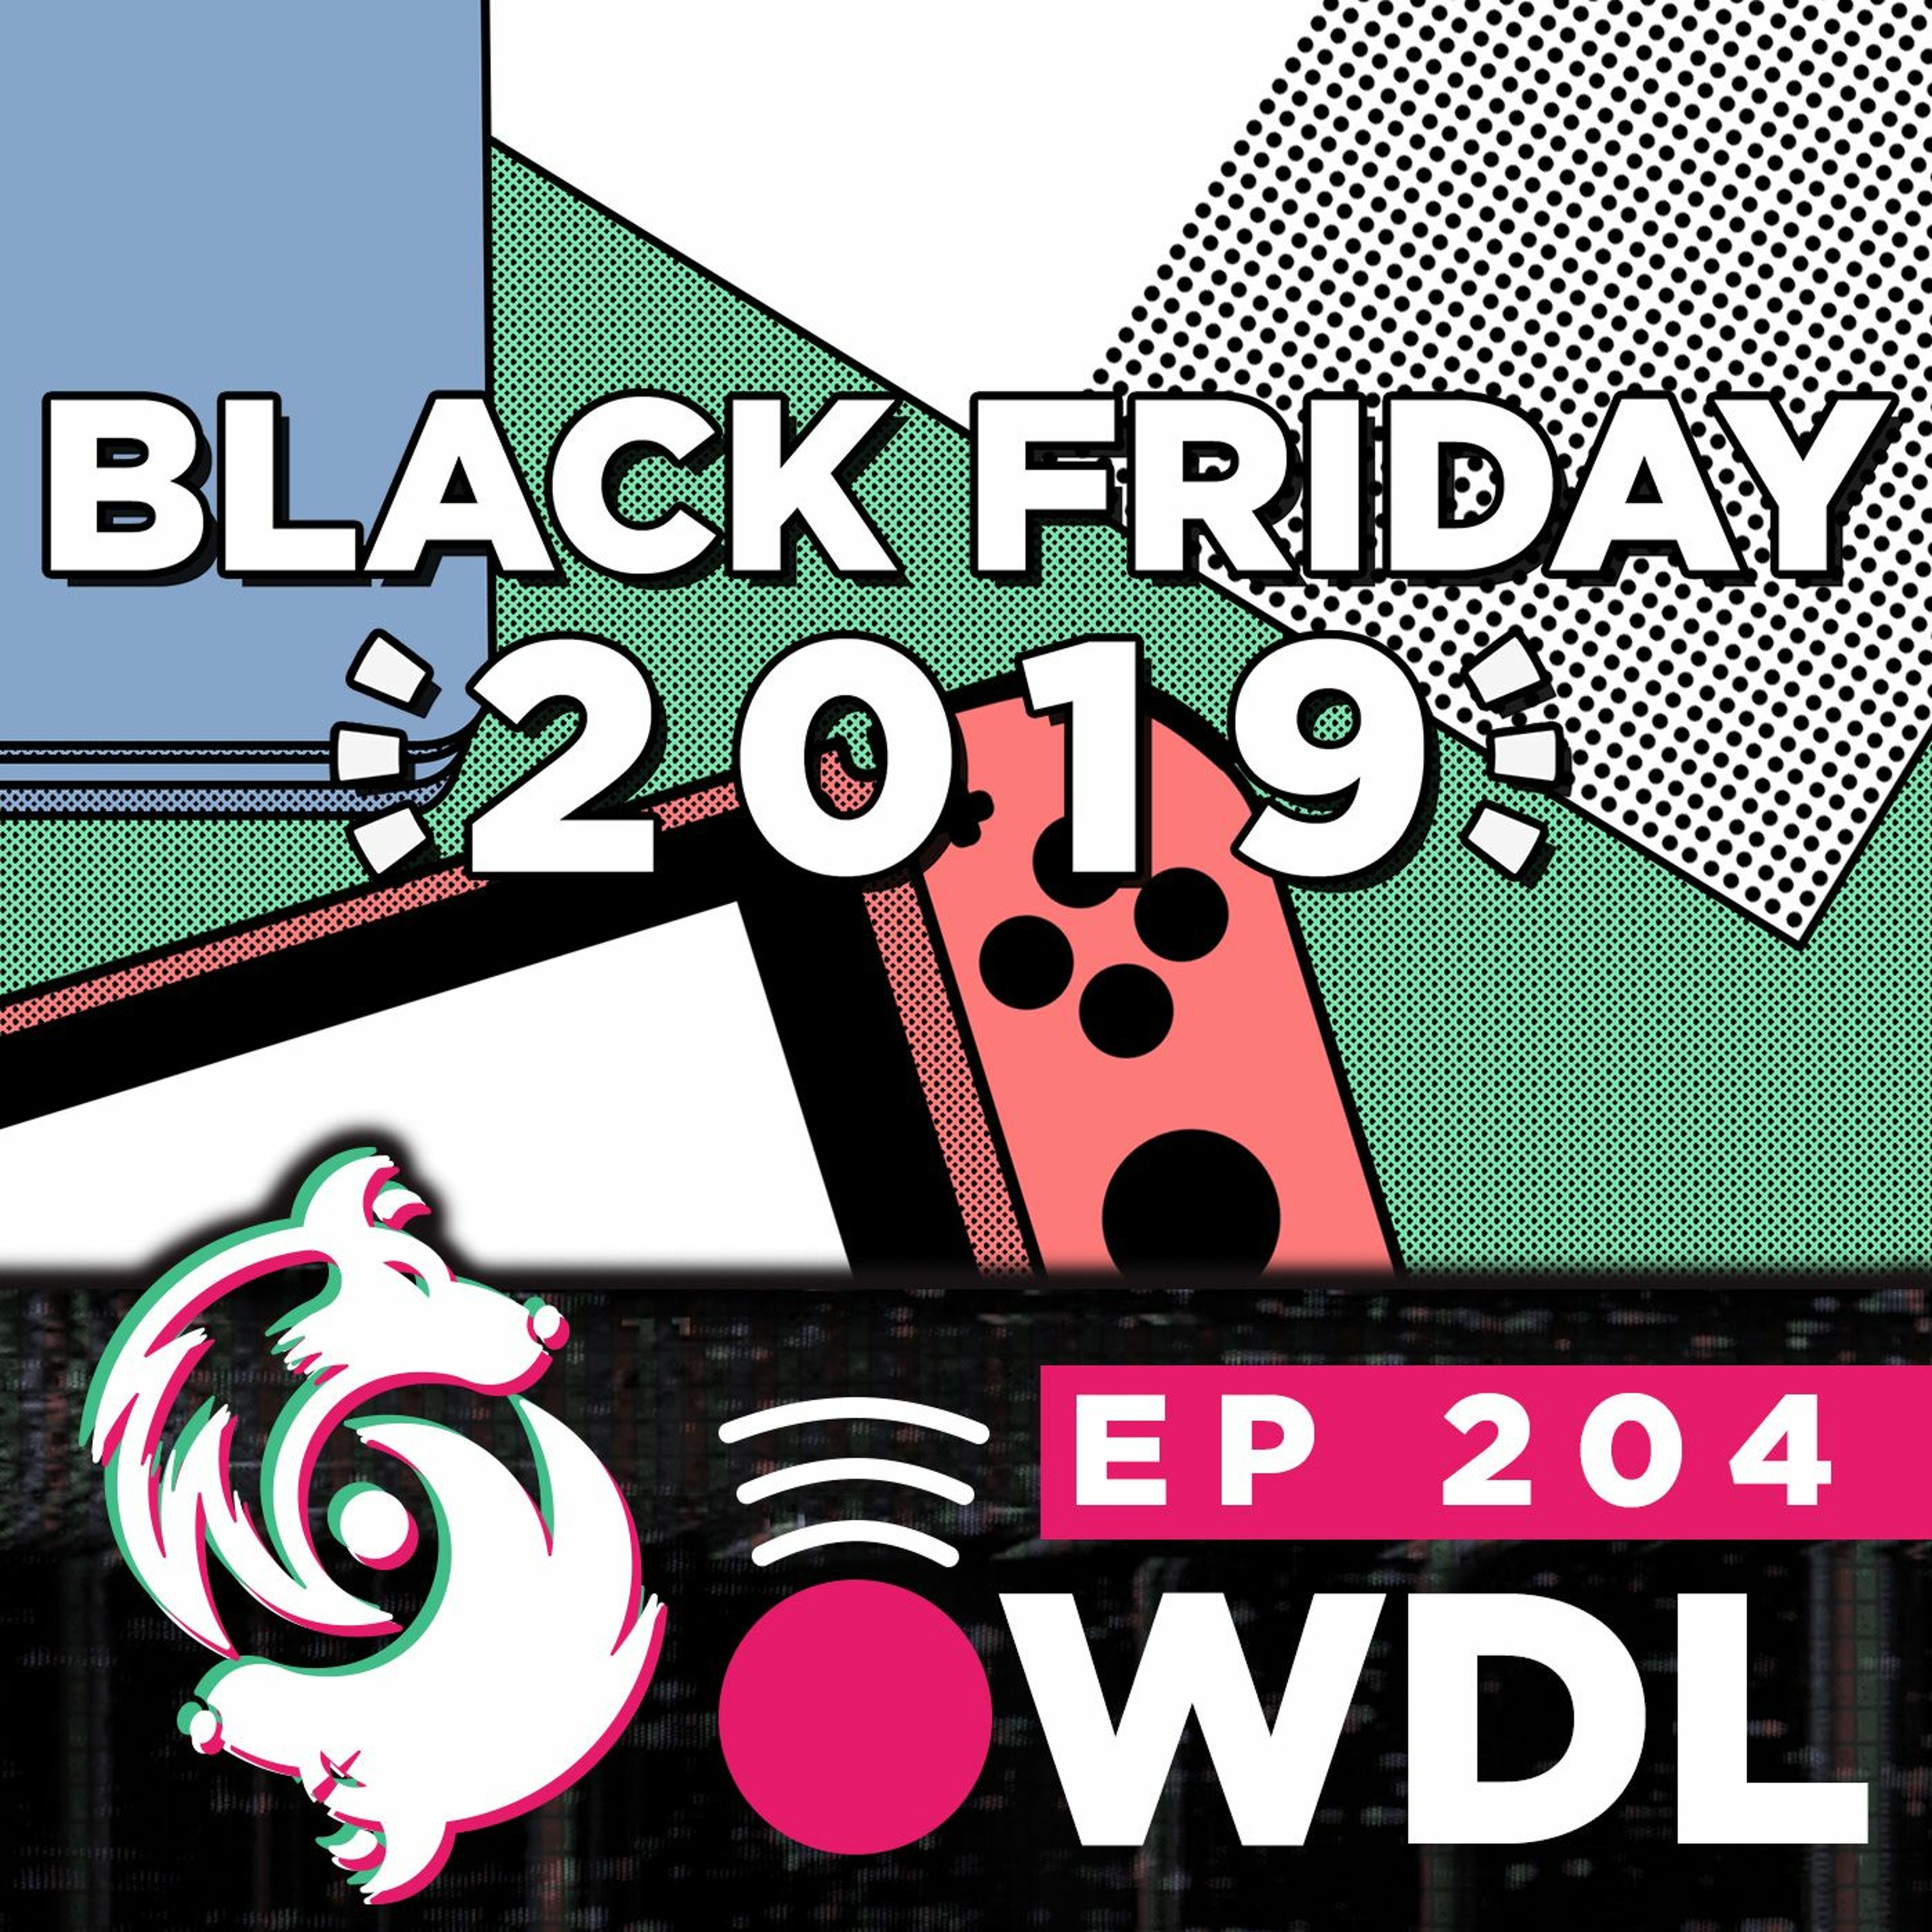 All the Black Friday & Cyber Monday gaming deals for 2019 - WDL Ep 204